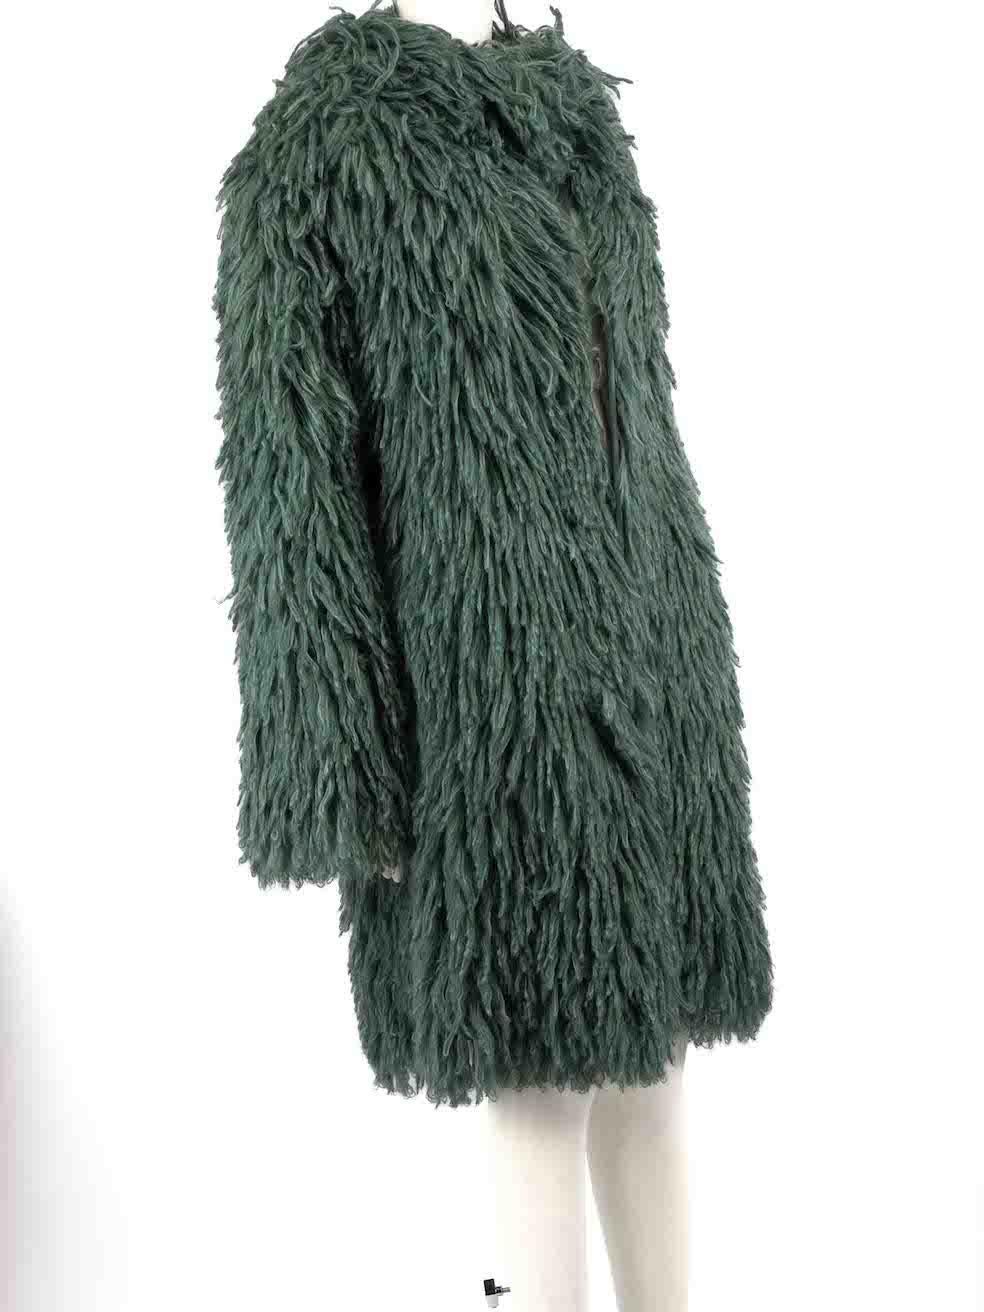 CONDITION is Very good. Hardly any visible wear to coat is evident on this used Bottega Veneta designer resale item.
 
 
 
 Details
 
 
 A/W 2018
 
 Green
 
 Wool
 
 Coat
 
 Looped wool texture
 
 Oversized fit
 
 Open front
 
 
 
 
 
 Made in